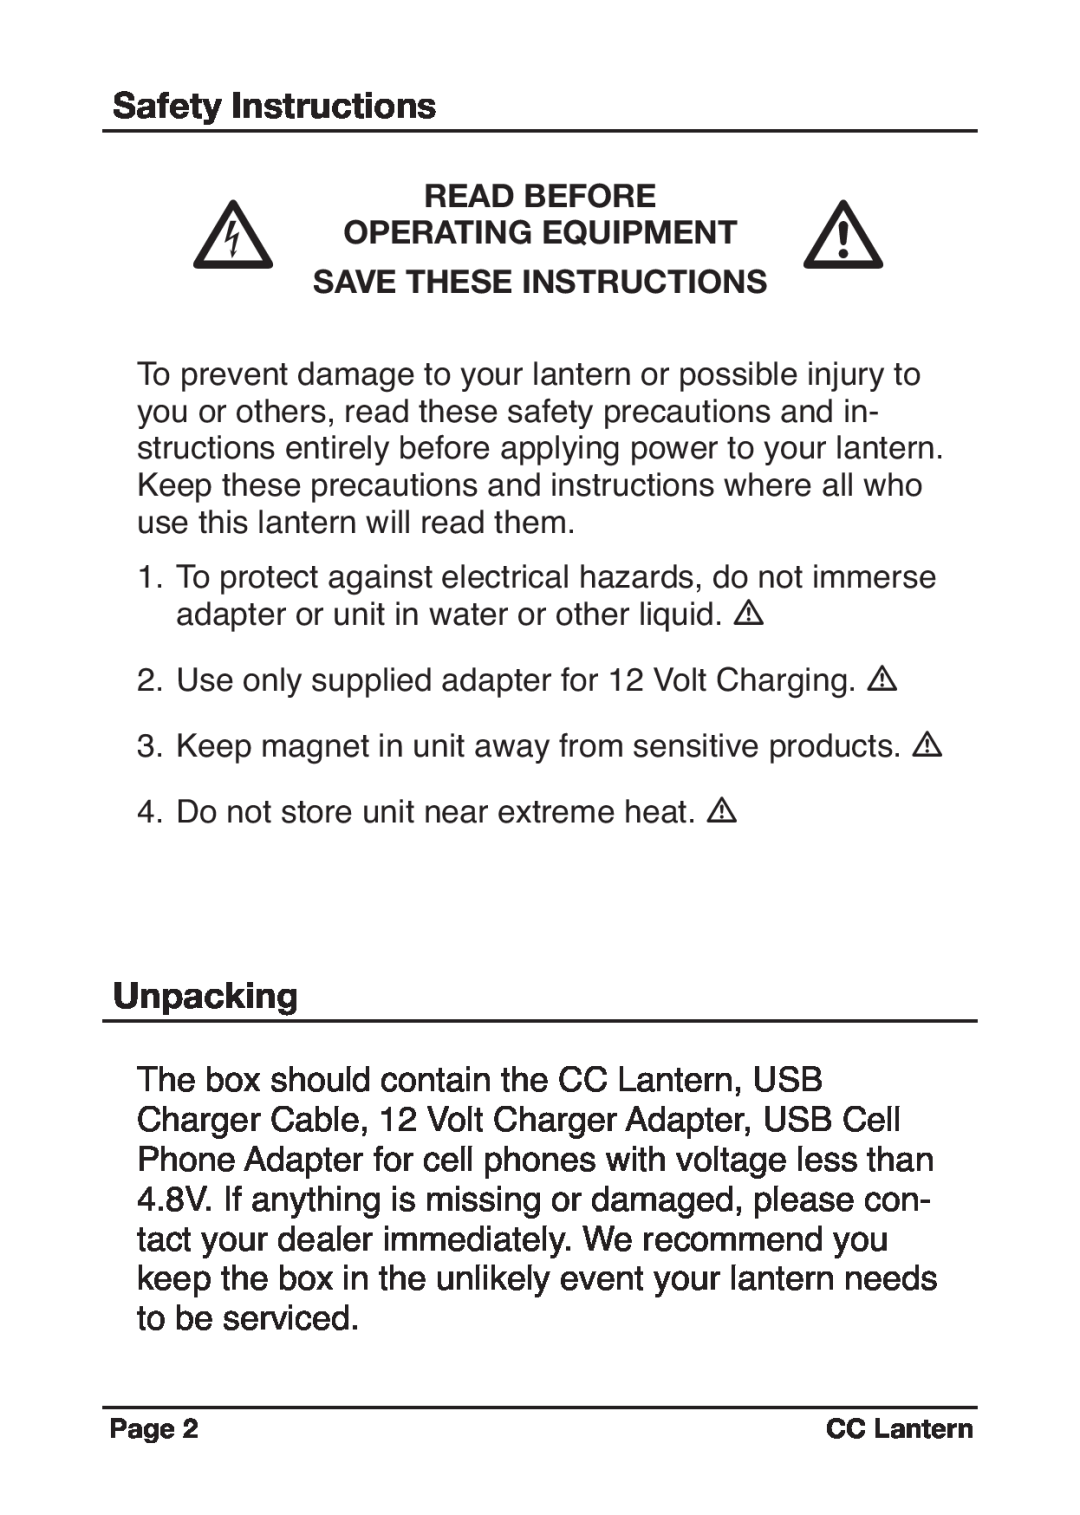 C. Crane Camping Equipment Safety Instructions, Unpacking, Read Before, Operating Equipment, Save These Instructions 